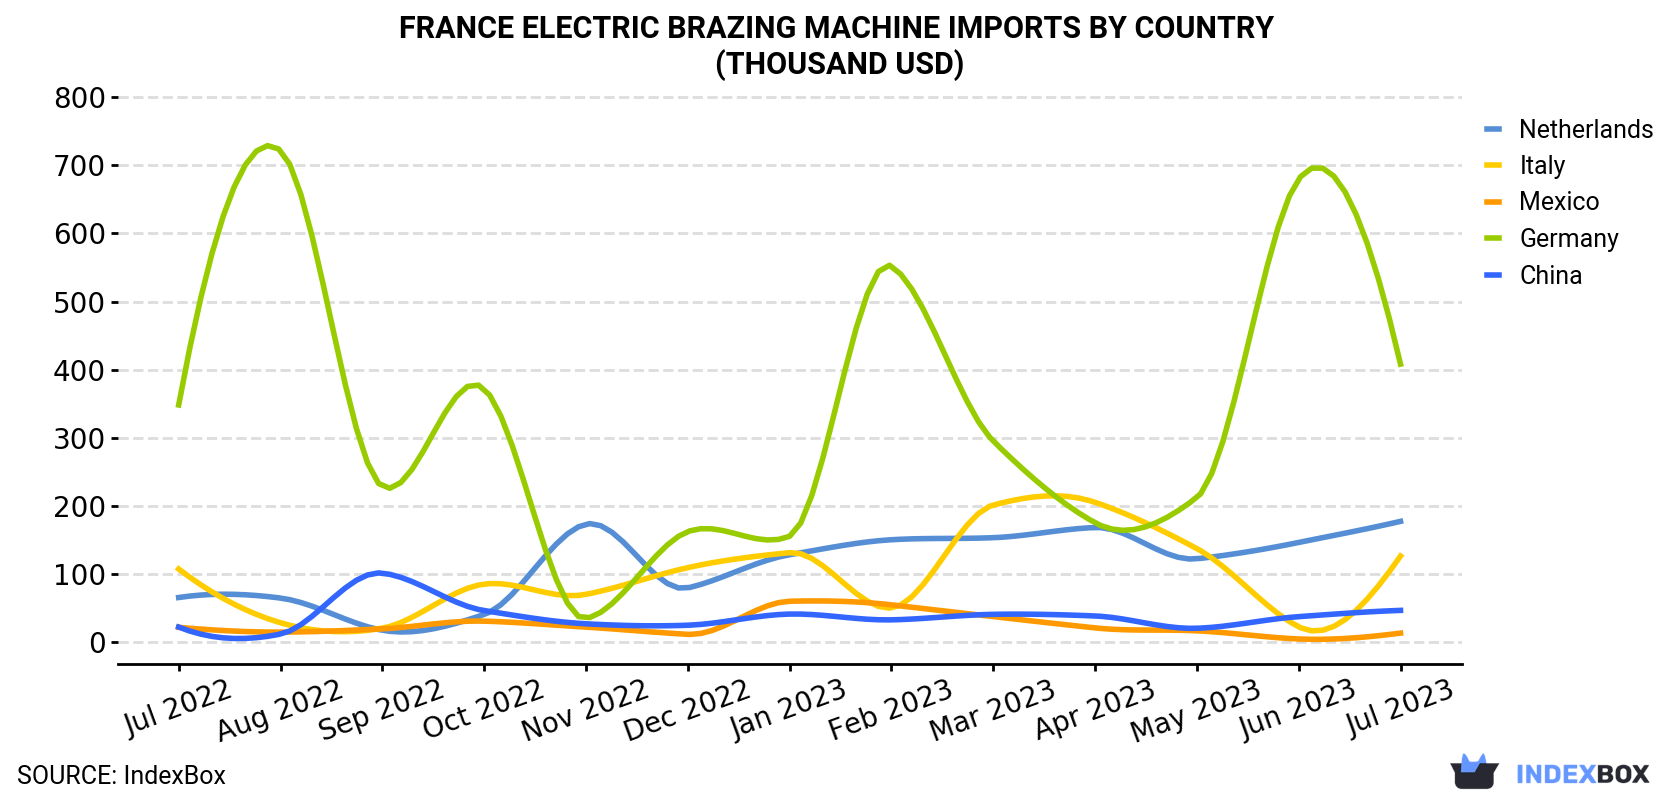 France Electric Brazing Machine Imports By Country (Thousand USD)